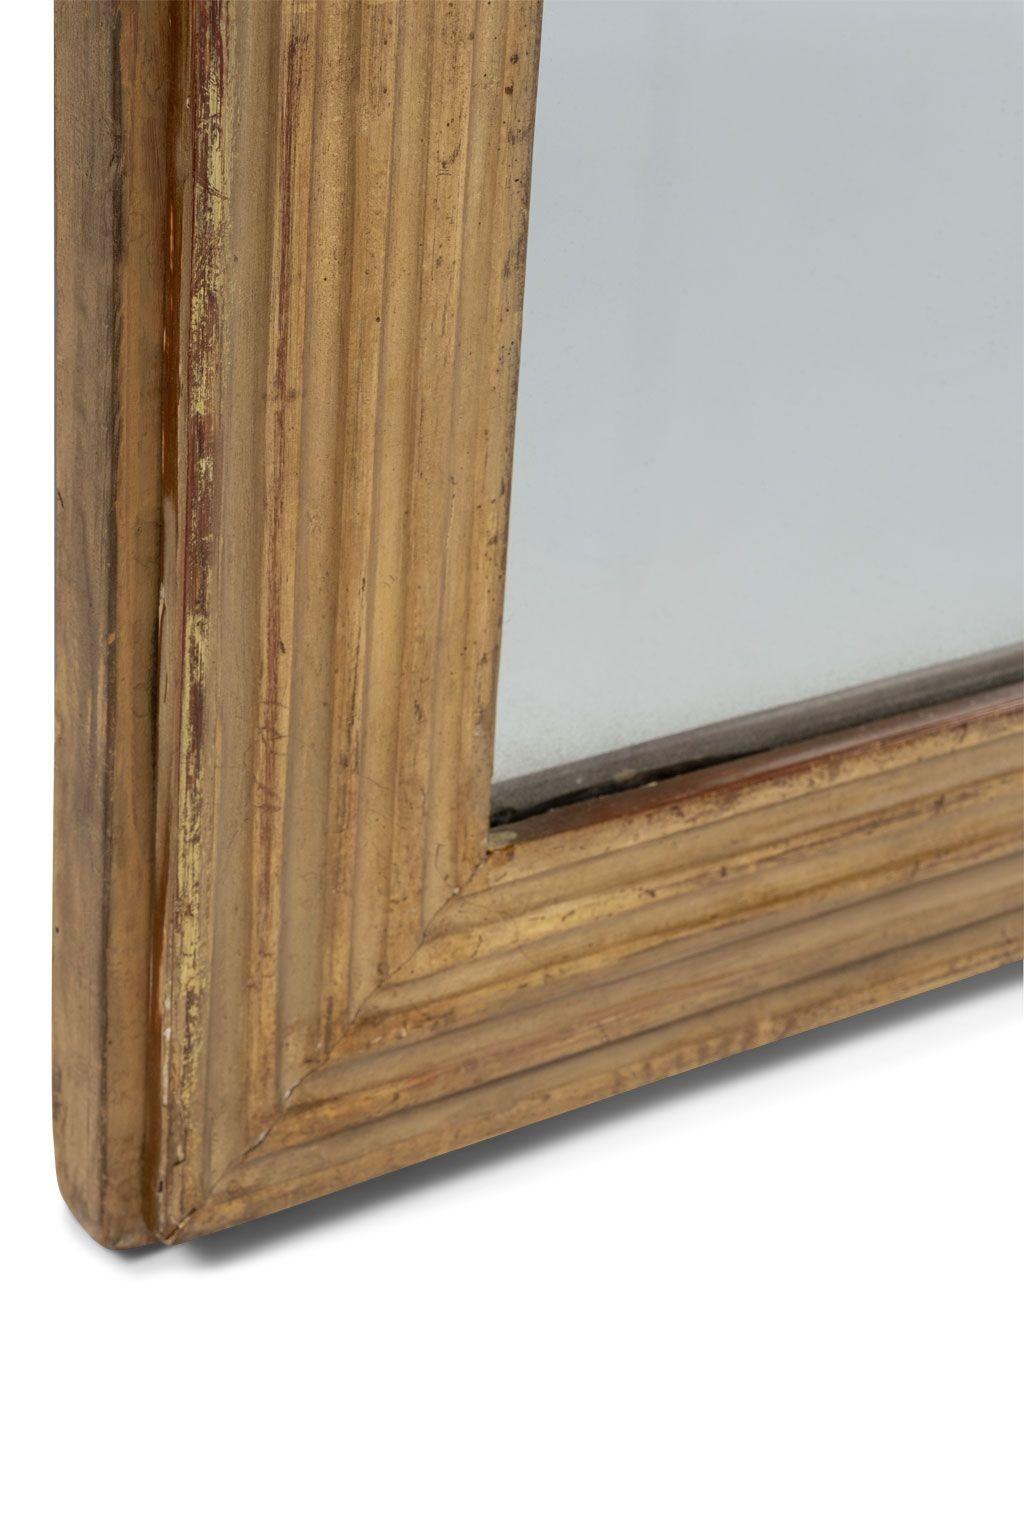 Neoclassical Square French Fluted Giltwood Mirror